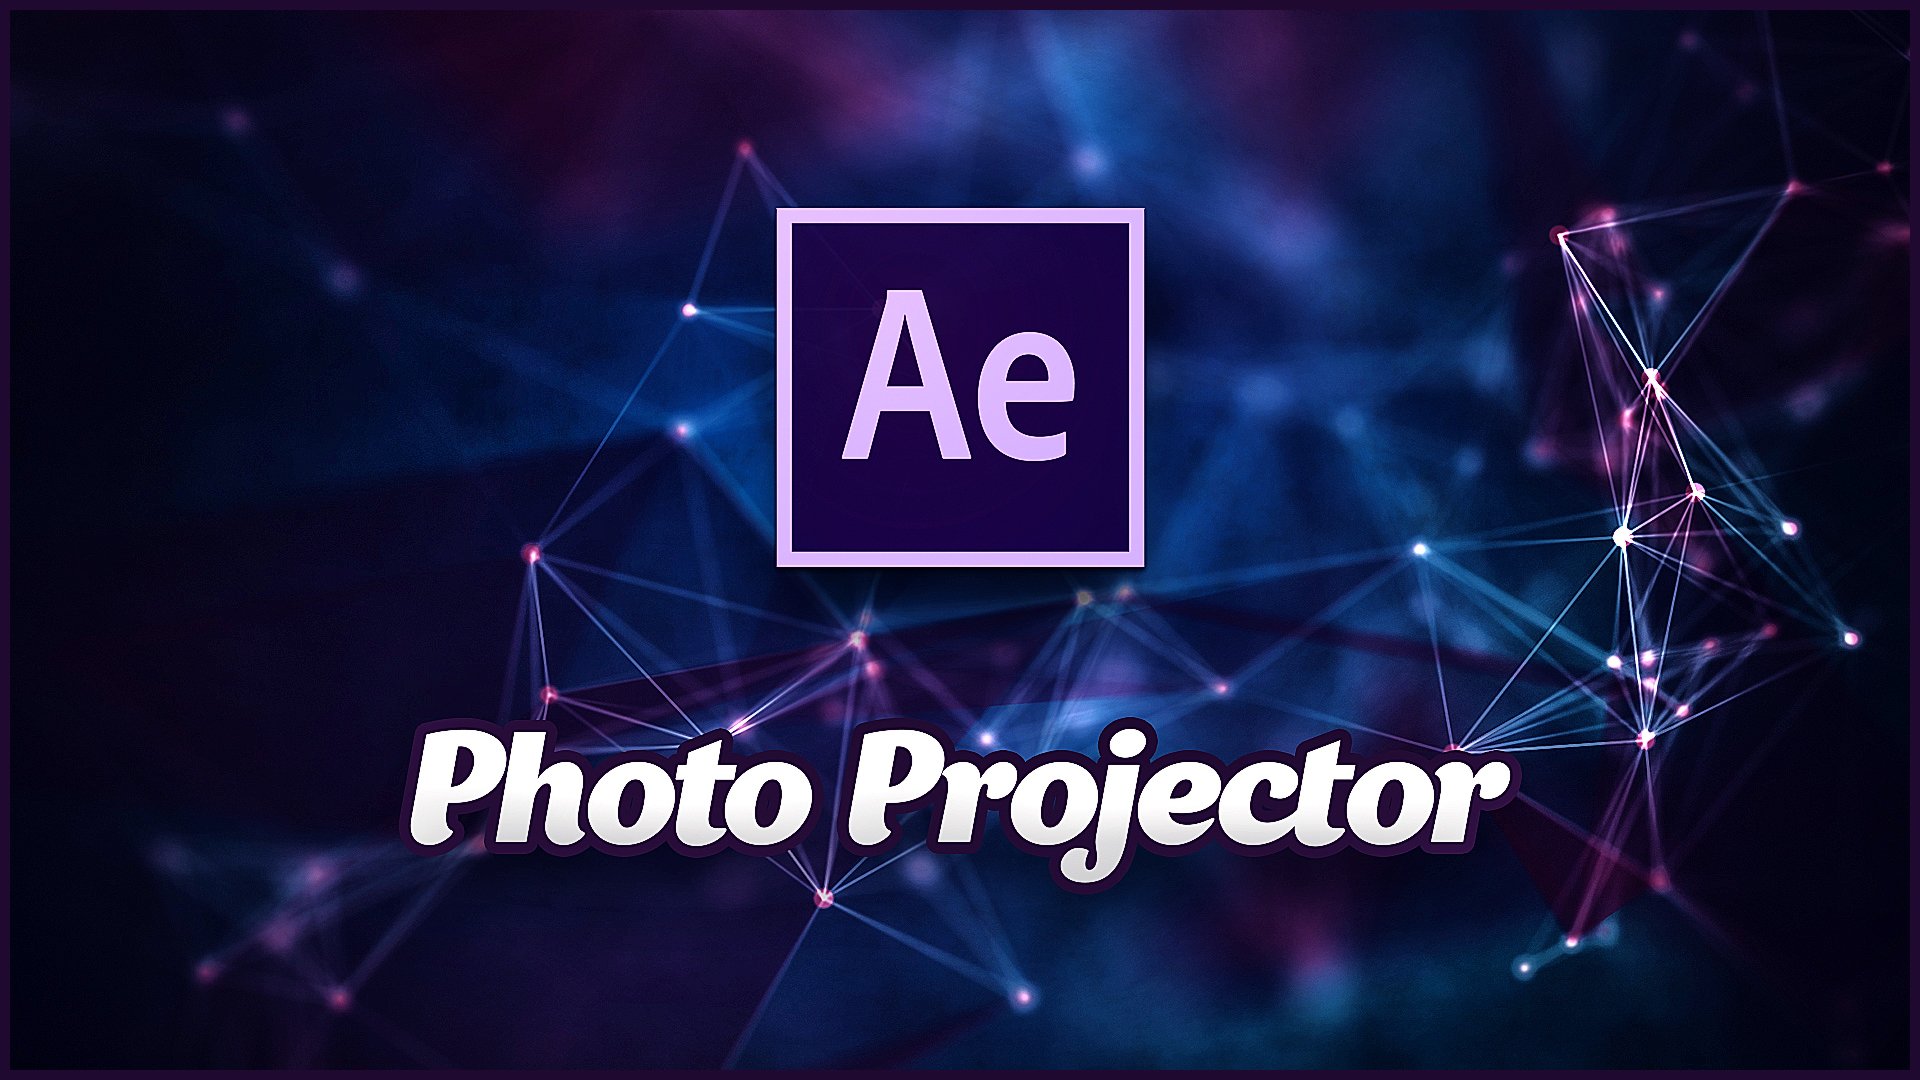 Photo Projector - After Effects Project (S E R E B R Y A K O V)